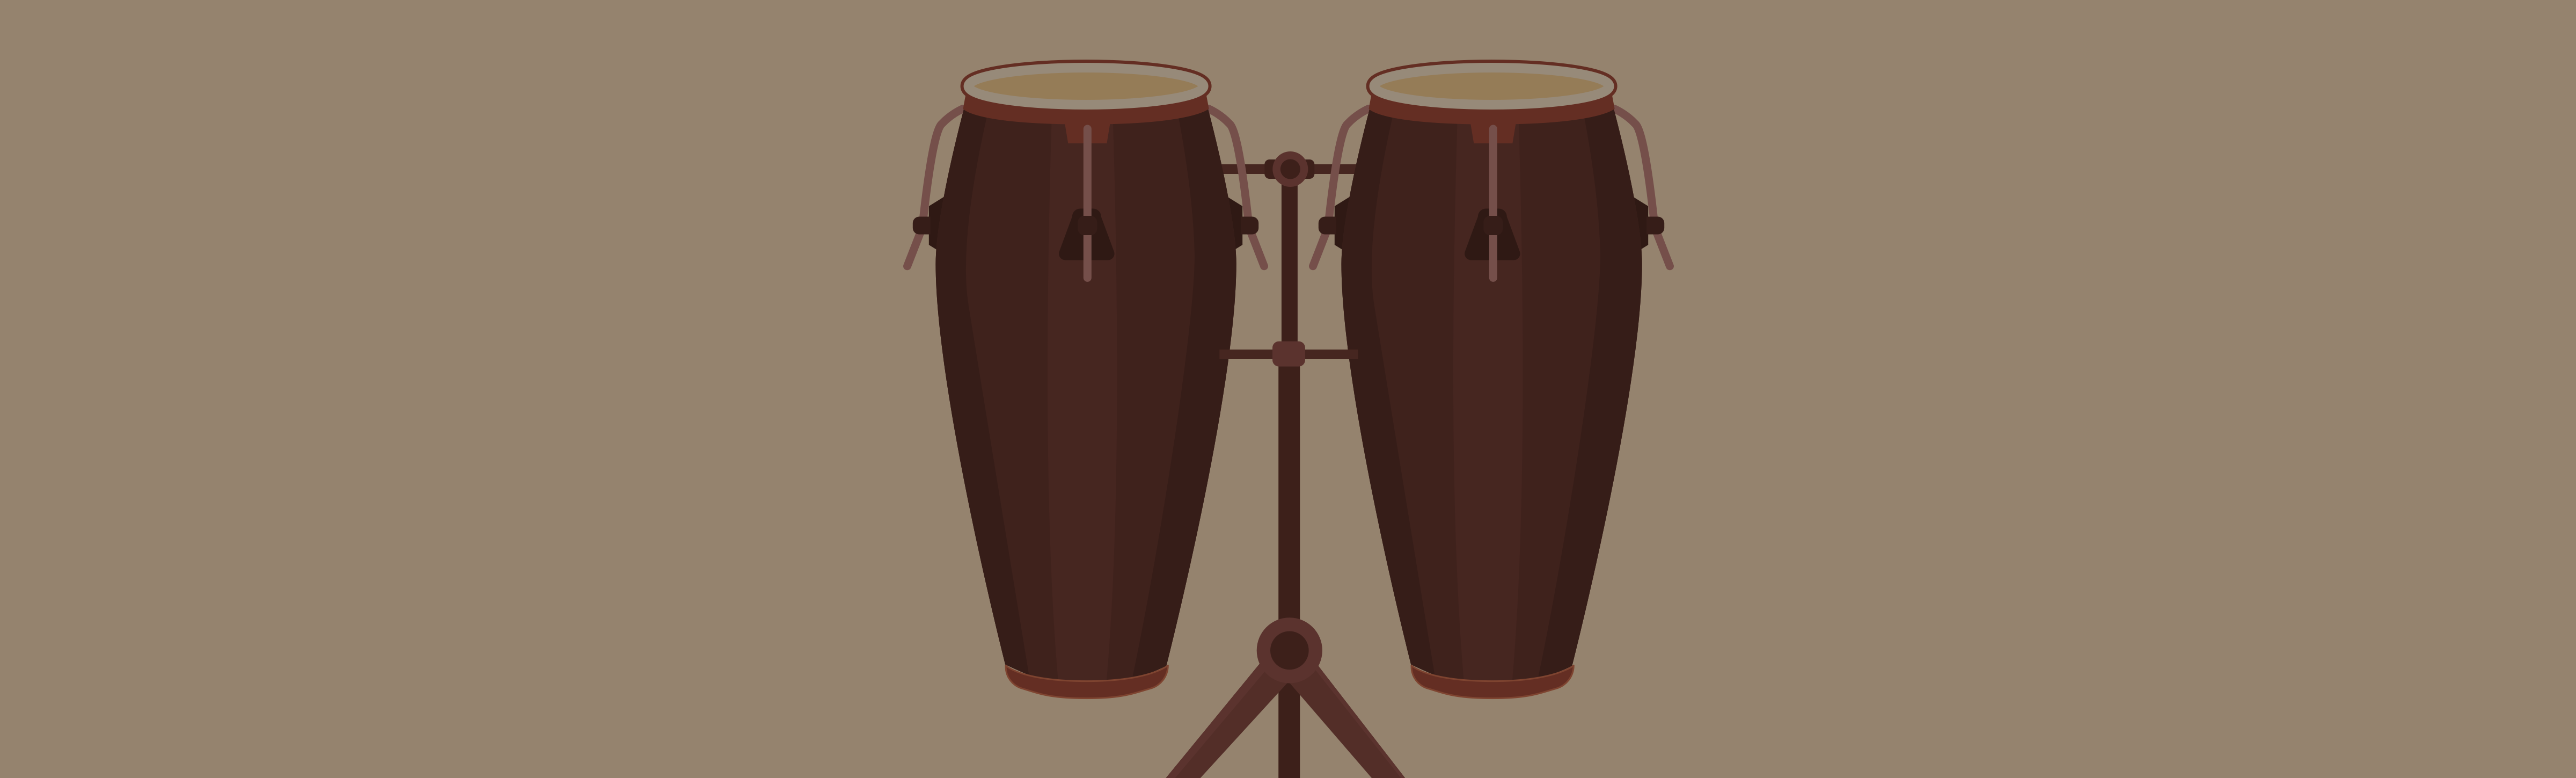 https://media.ipassio.com/media/lookup/instrument/congas/brand_image/congas.png